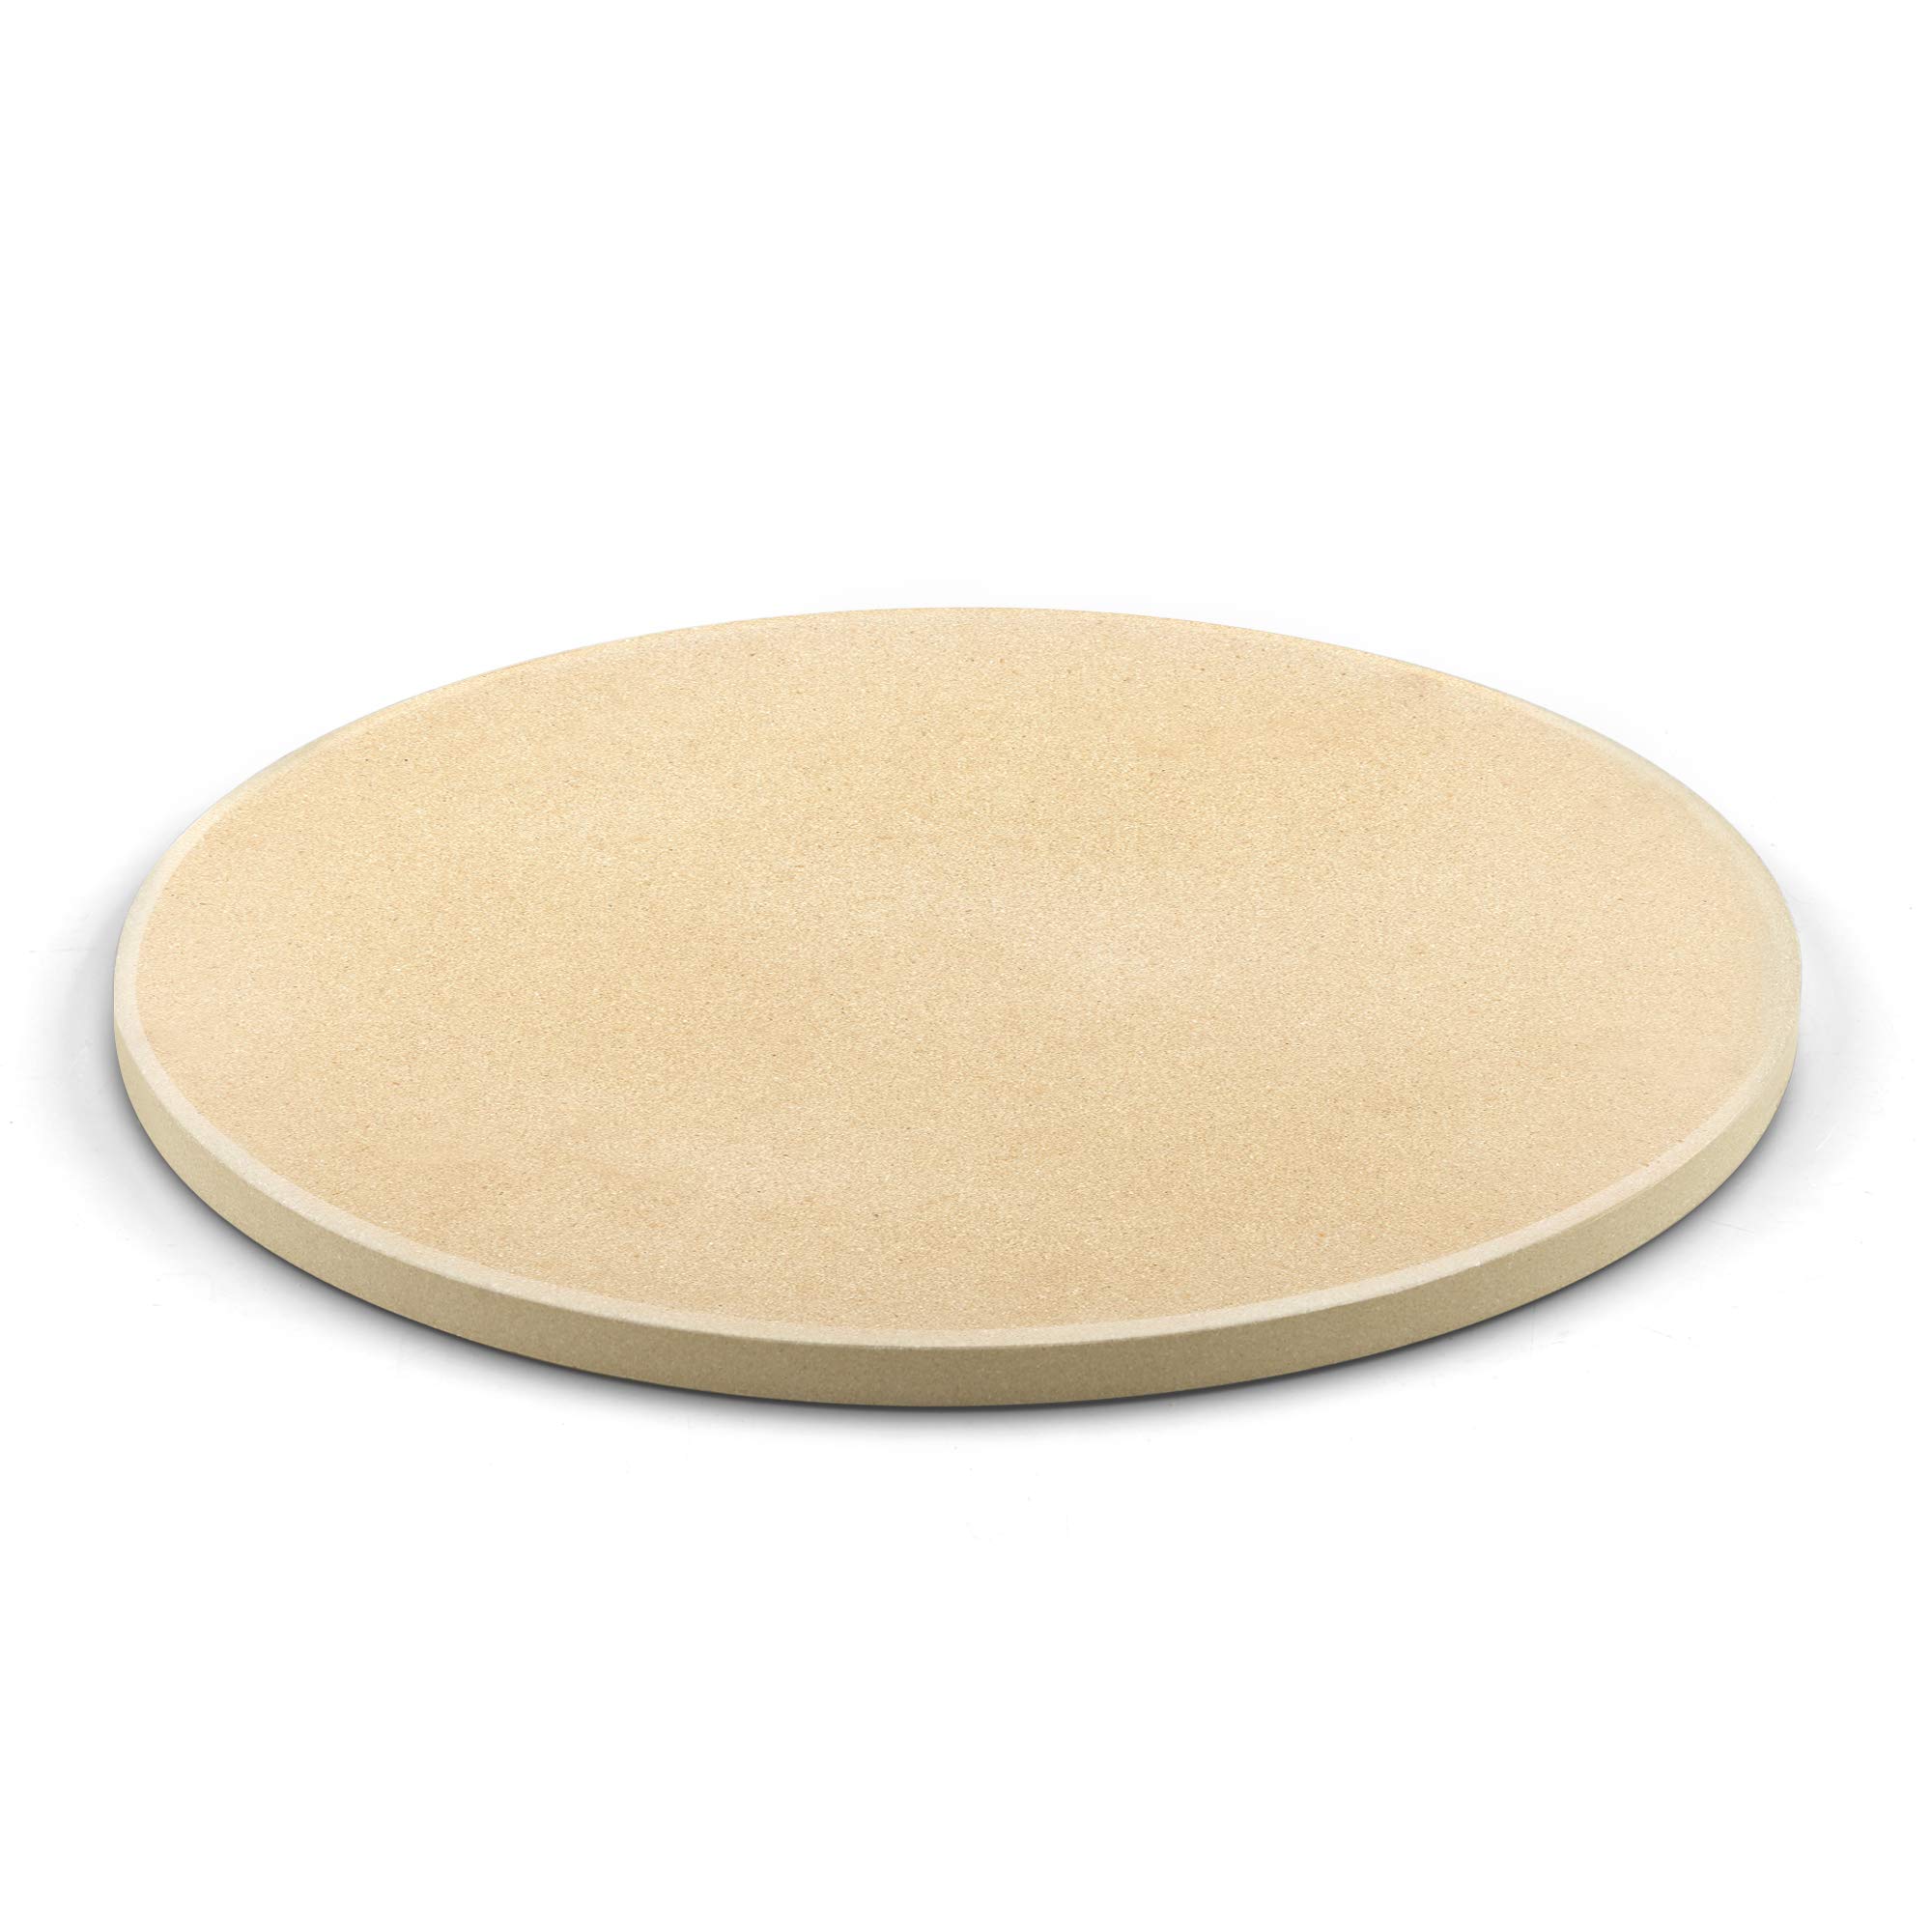 Cook N Home Round 16-inch Pizza Grilling Baking StoneHeavy Duty Cordierite Pizza Stone for Oven and Grill, Thermal Shock Resistant, Ideal for Baking Crisp Crust Pizza, Bread and More, Includes Scraper